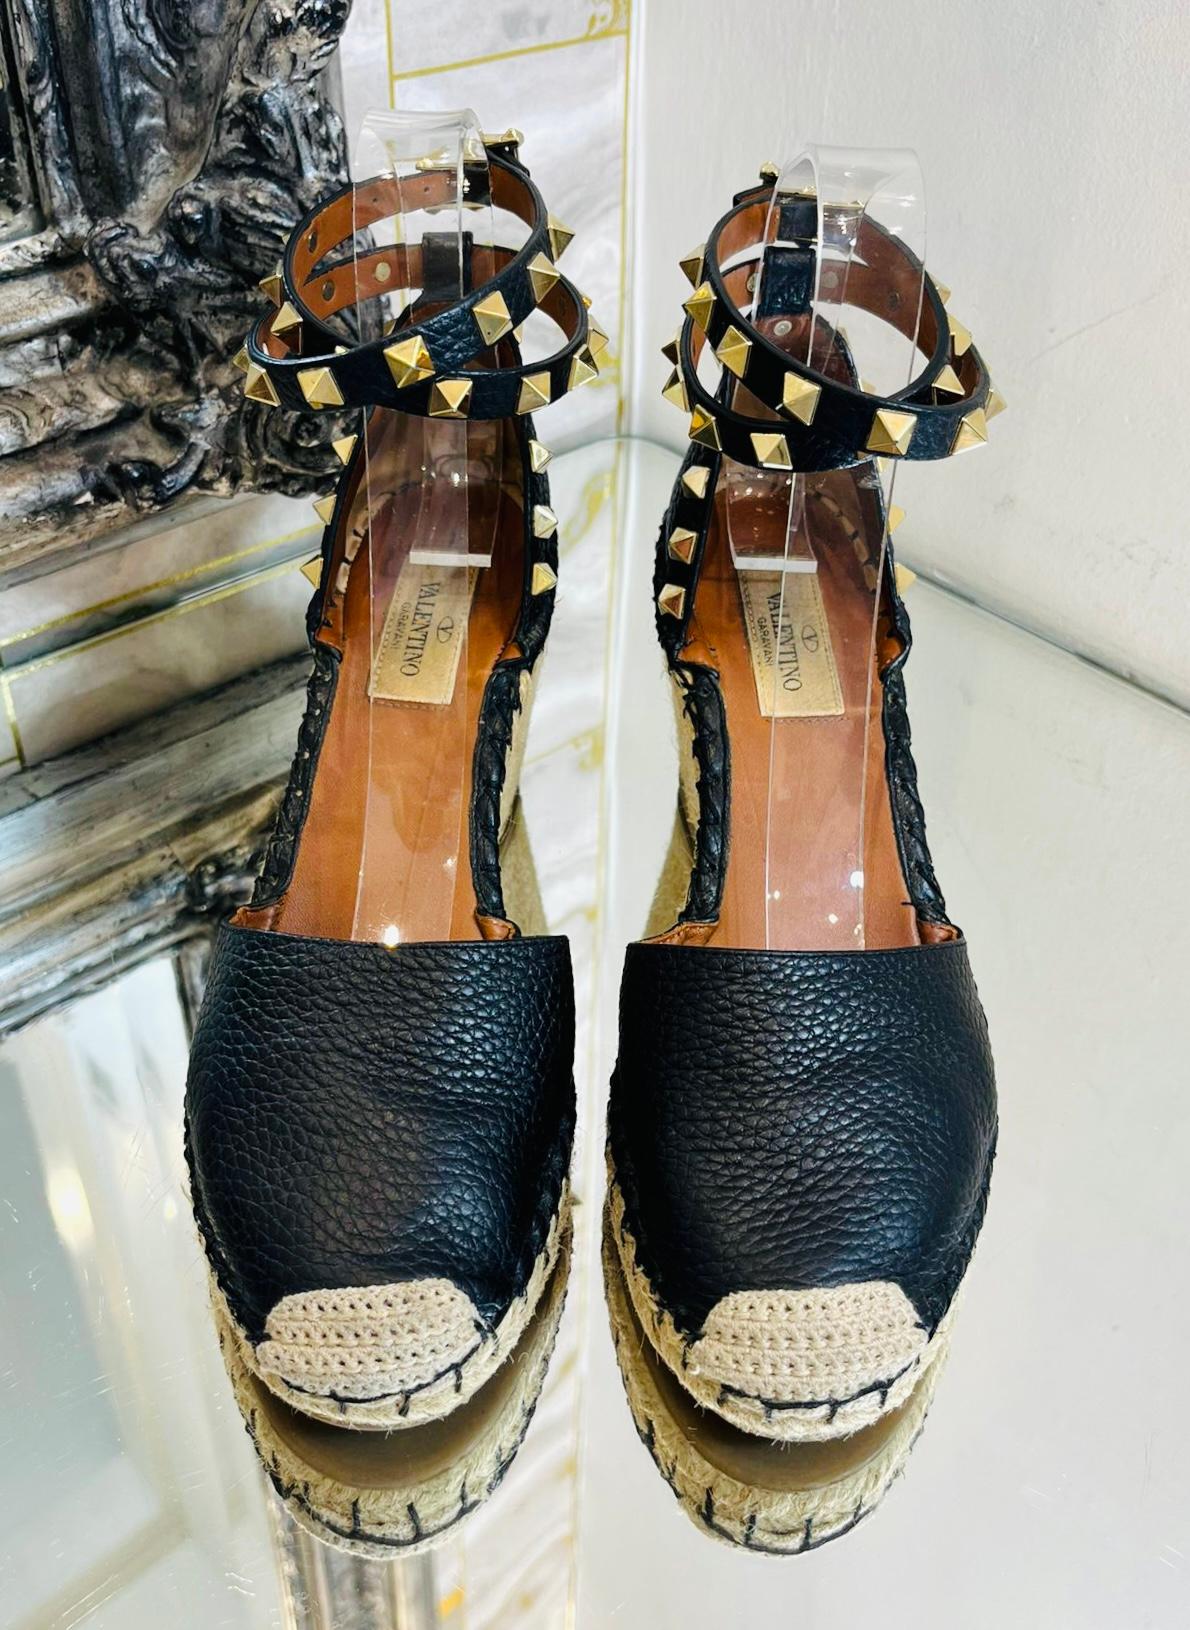 Valentino Rockstud Double Leather Espadrilles

Black sandals crafted from textured leather and set on a lightweight jute wedge.

Detailed with the brand's signature hand-placed gold pyramid studs.

Featuring double ankle strap with buckle closure